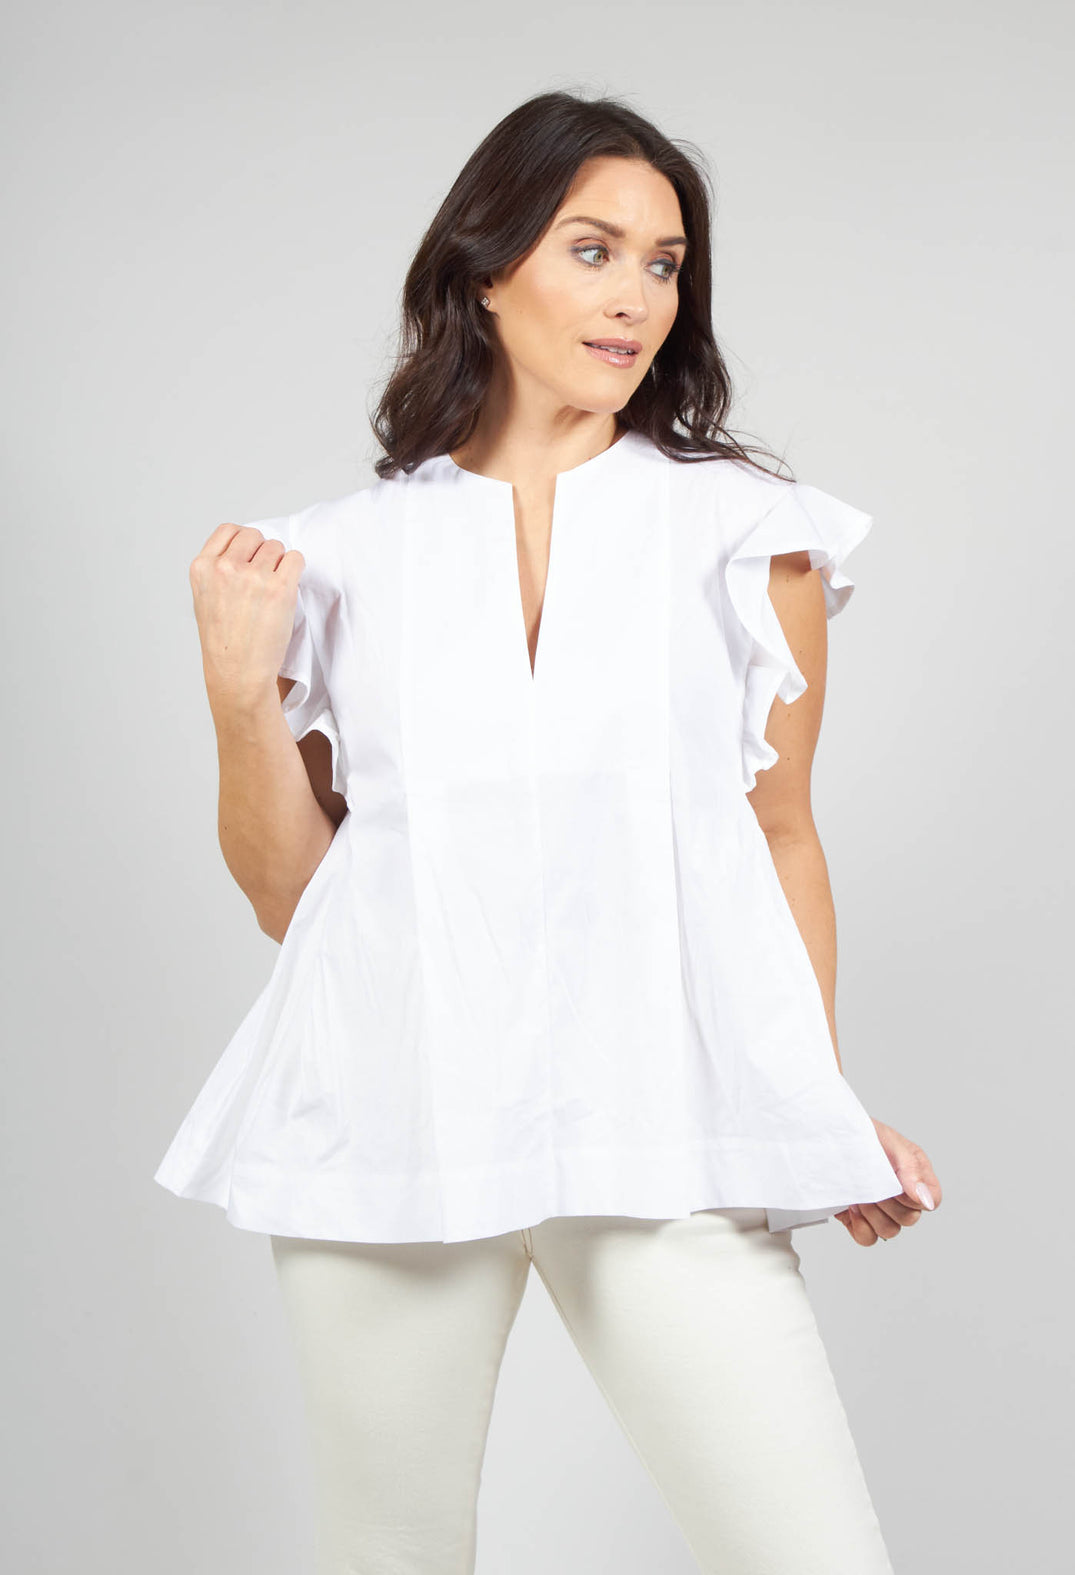 lady wearing a white v neck shirt with flounce sleeves